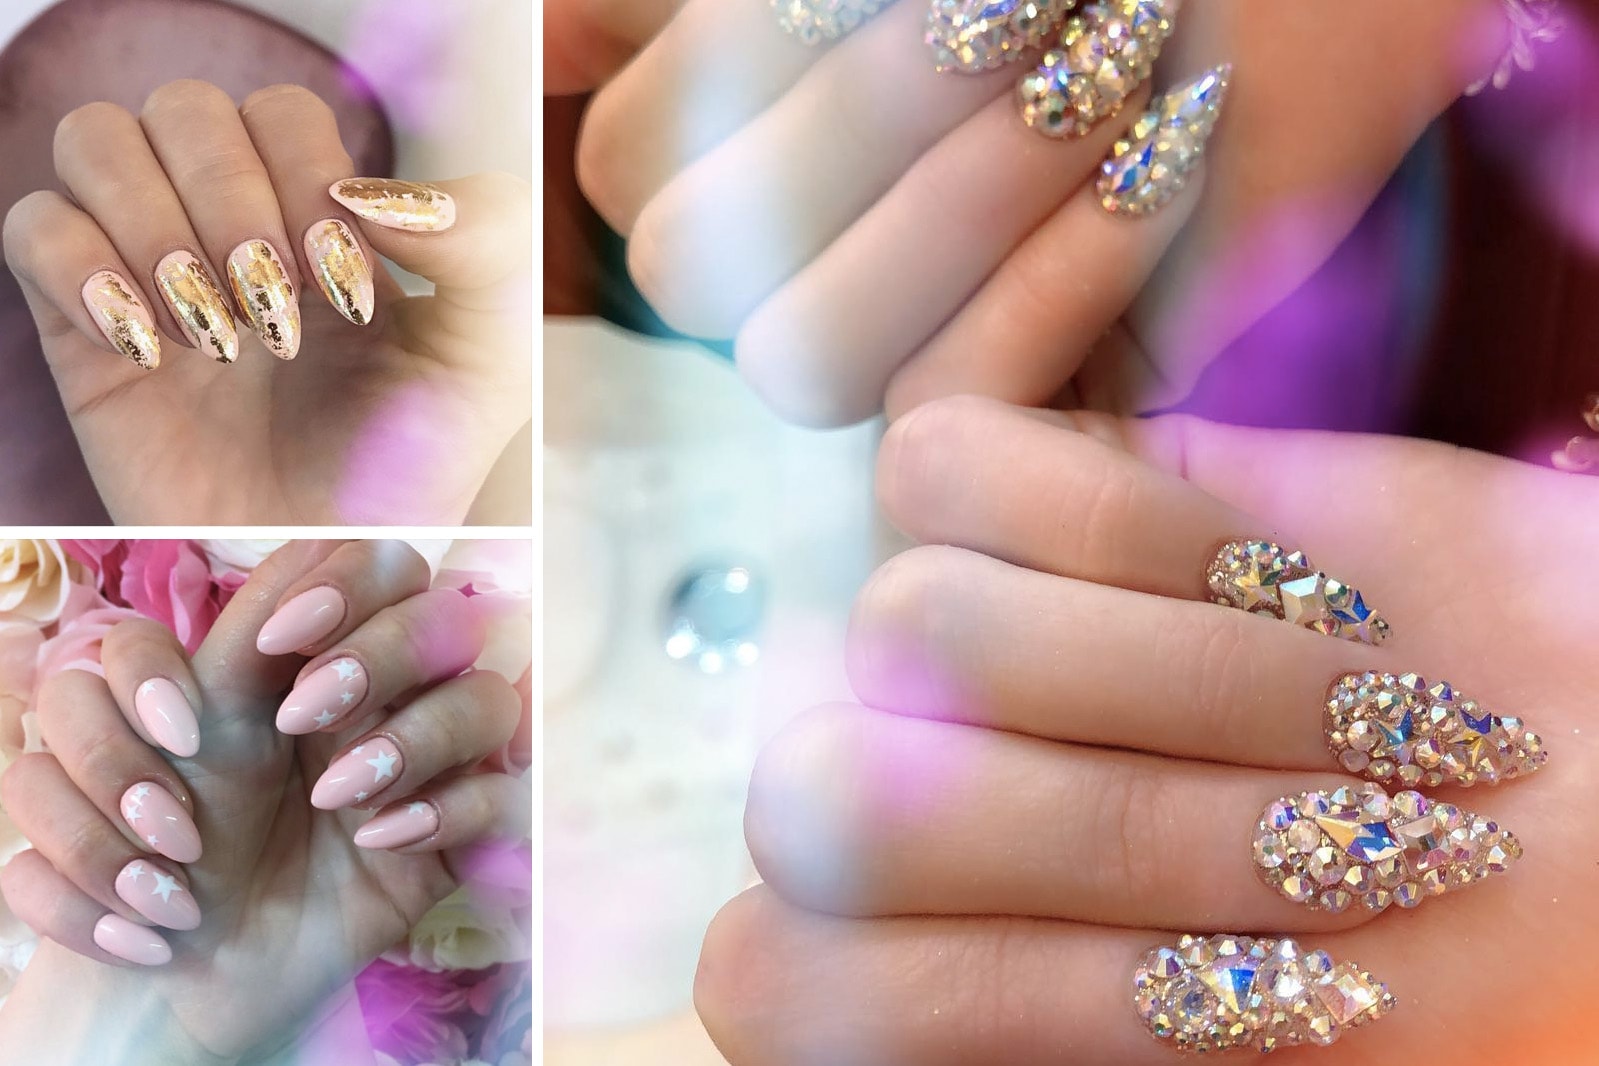 7. London's Most Instagram-Worthy Crazy Nail Art Salons - wide 6